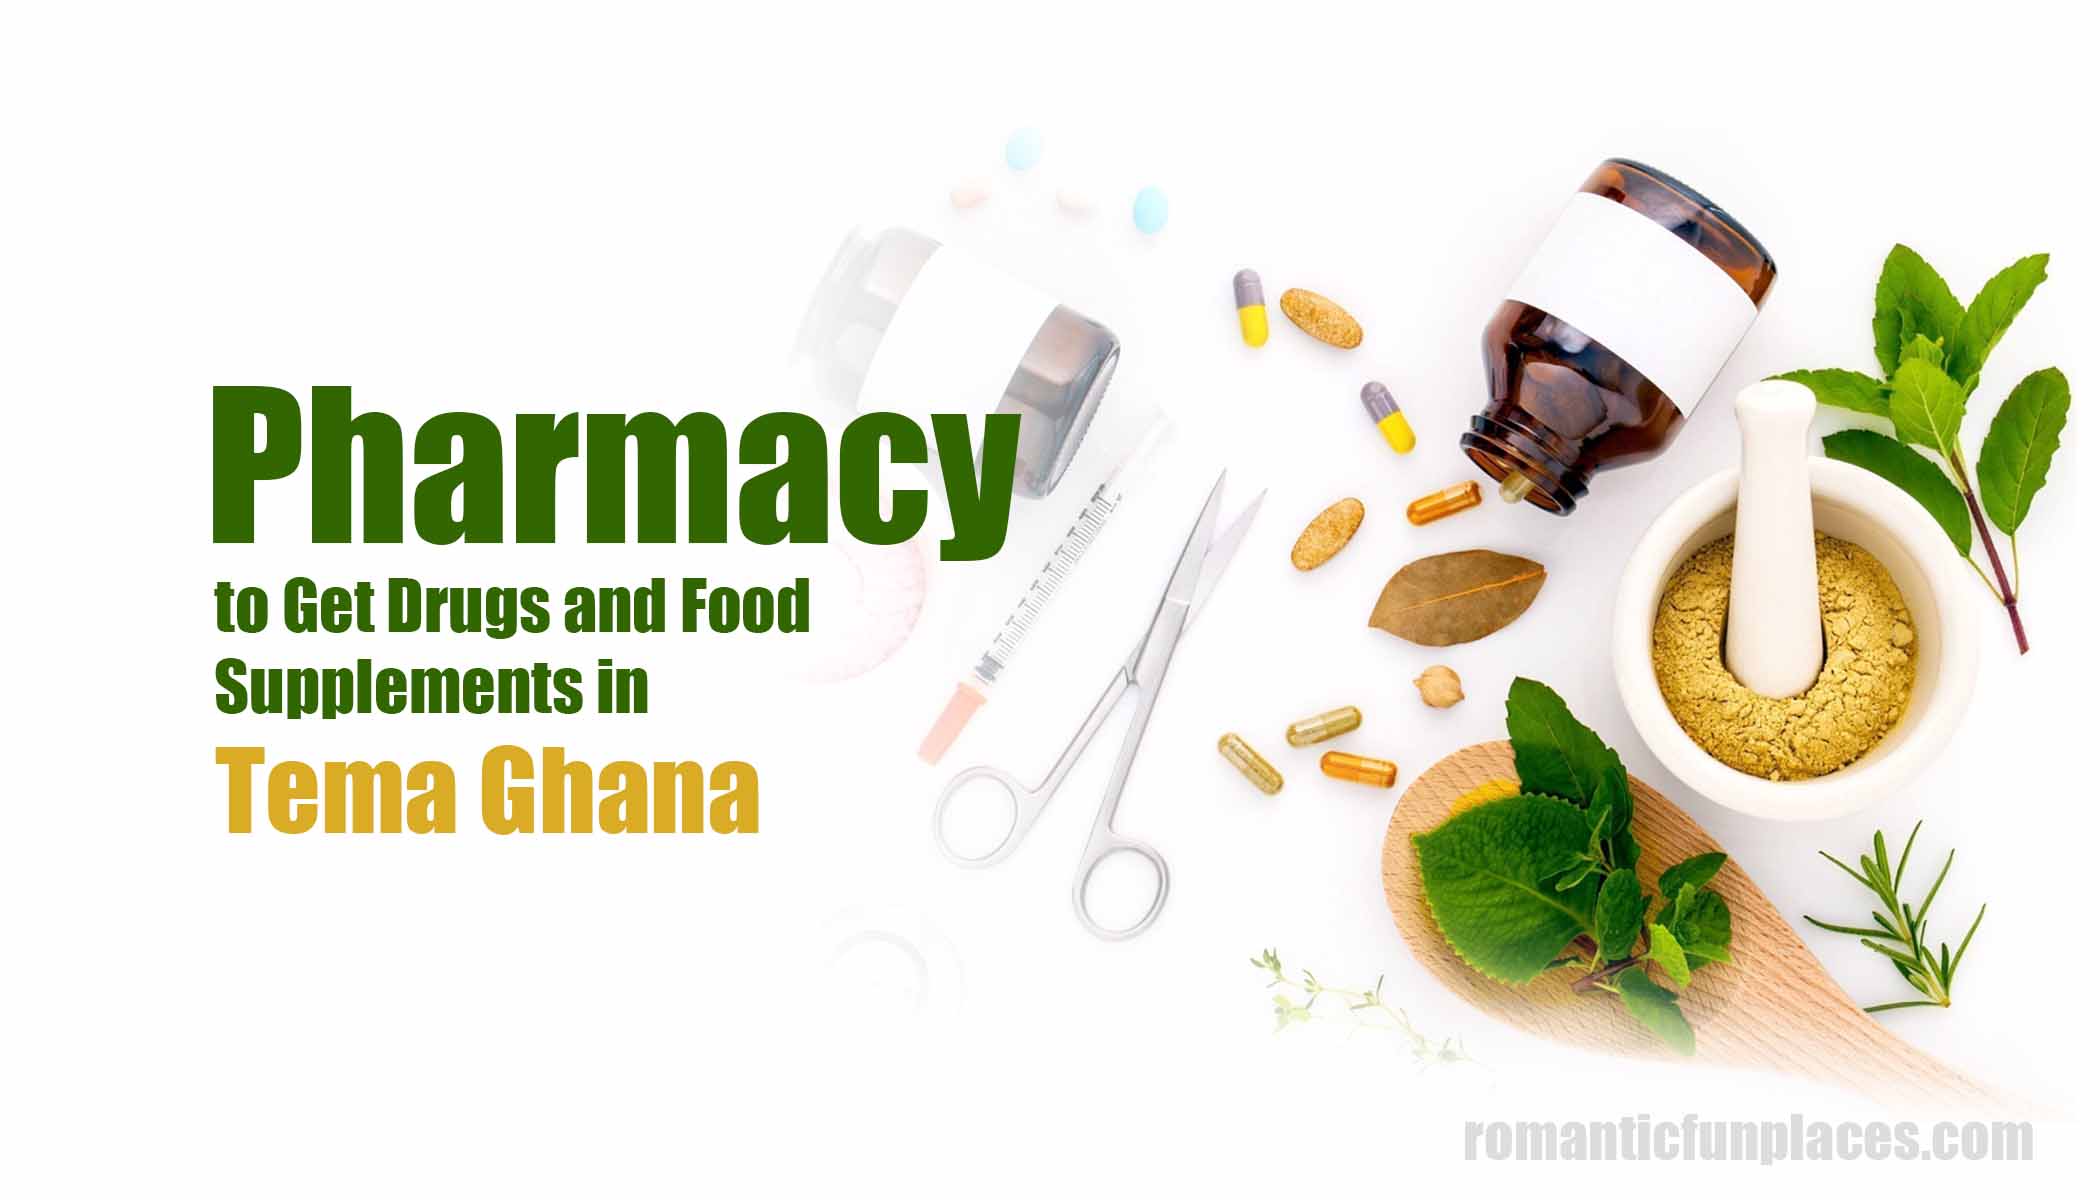 Pharmacy to Get Drugs and Food Supplements in Tema Ghana